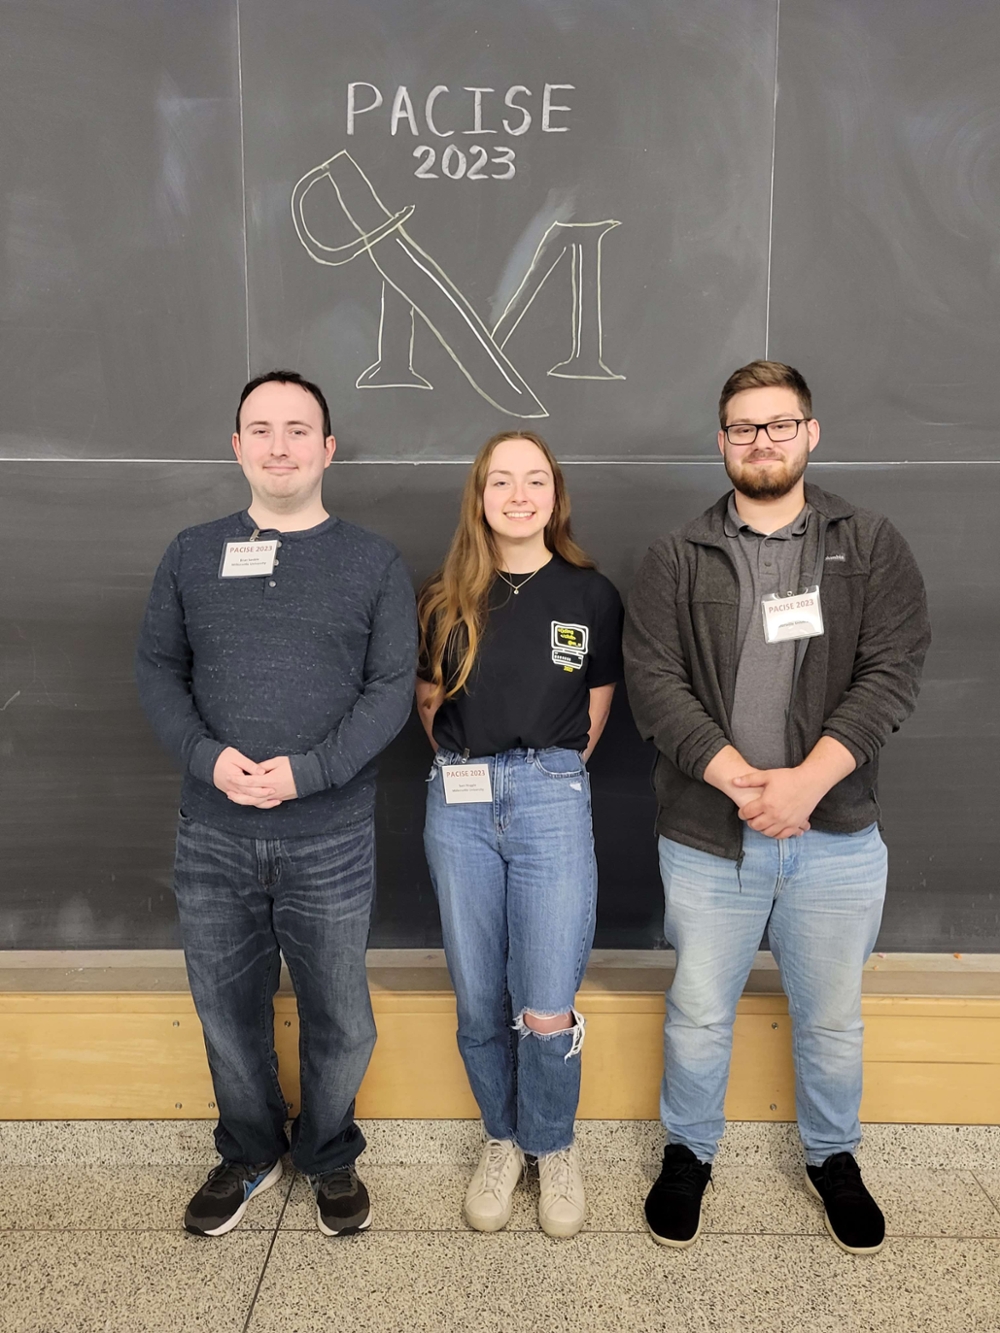 Briar Sauble, Sam Noggle, and Justin Stevens presented at the PACISE conference